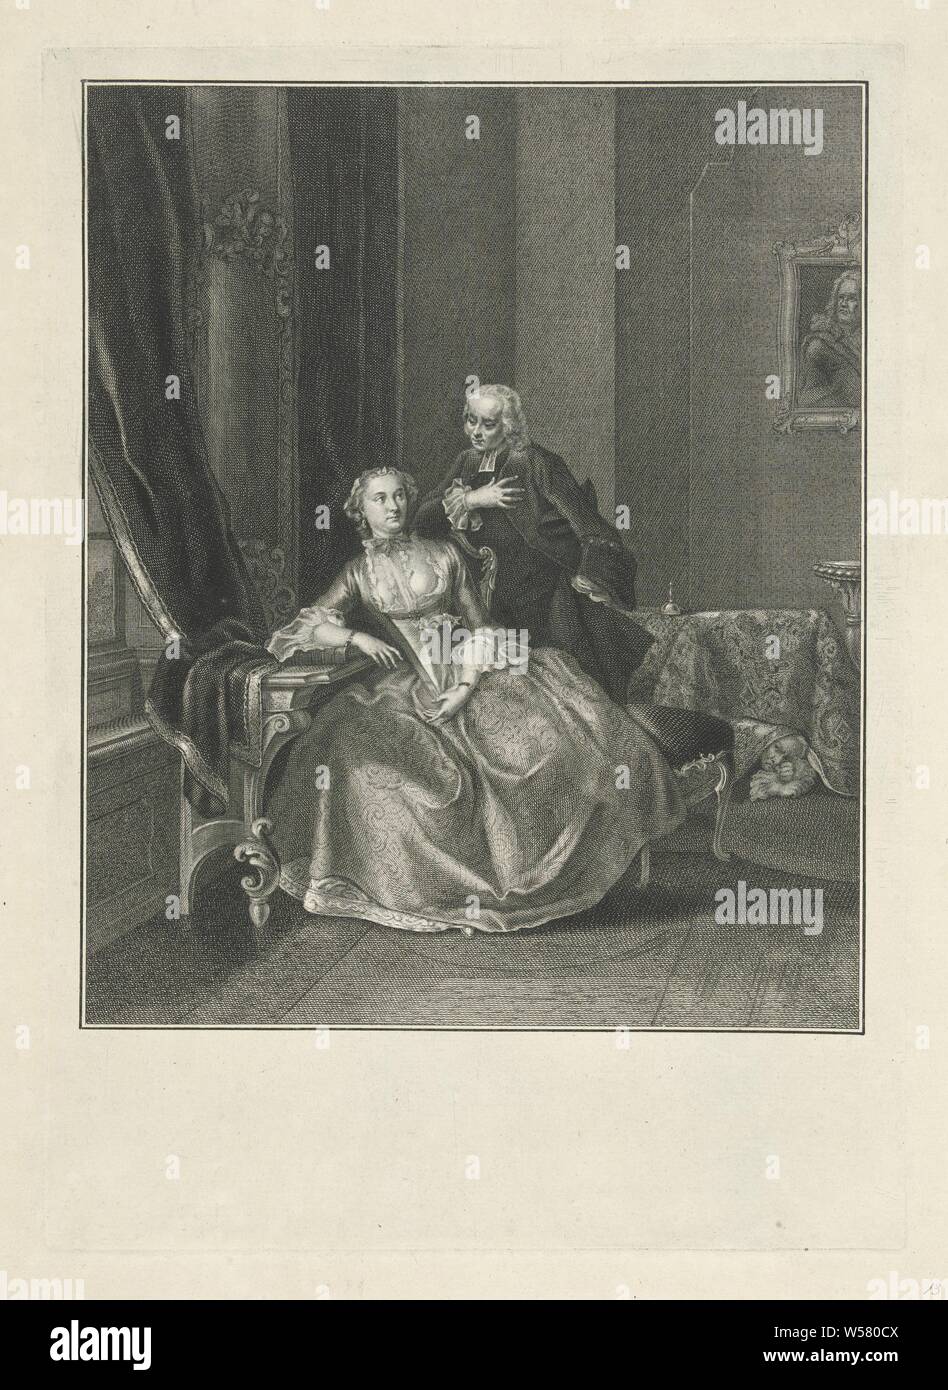 Tartuffe or the hypocritical impostor, Interieur with a lady, Elmire and a gentleman, Tartuffe. In the background is a second man, Orgon, under a table. Scene from the play Tartuffe van Molière from 1664: the lady, Elmire, dressed in a frock with deep neckline sits on a chair, her right arm leaning on a thick book on a table. Behind her is the character Tartuffe, who tries to seduce her. In the background you can see how her husband Orgon watches the two under a table. Through this list, Elmire convinces her husband that his blind faith in Tartuffe, a religious fanatic, is being abused Stock Photo